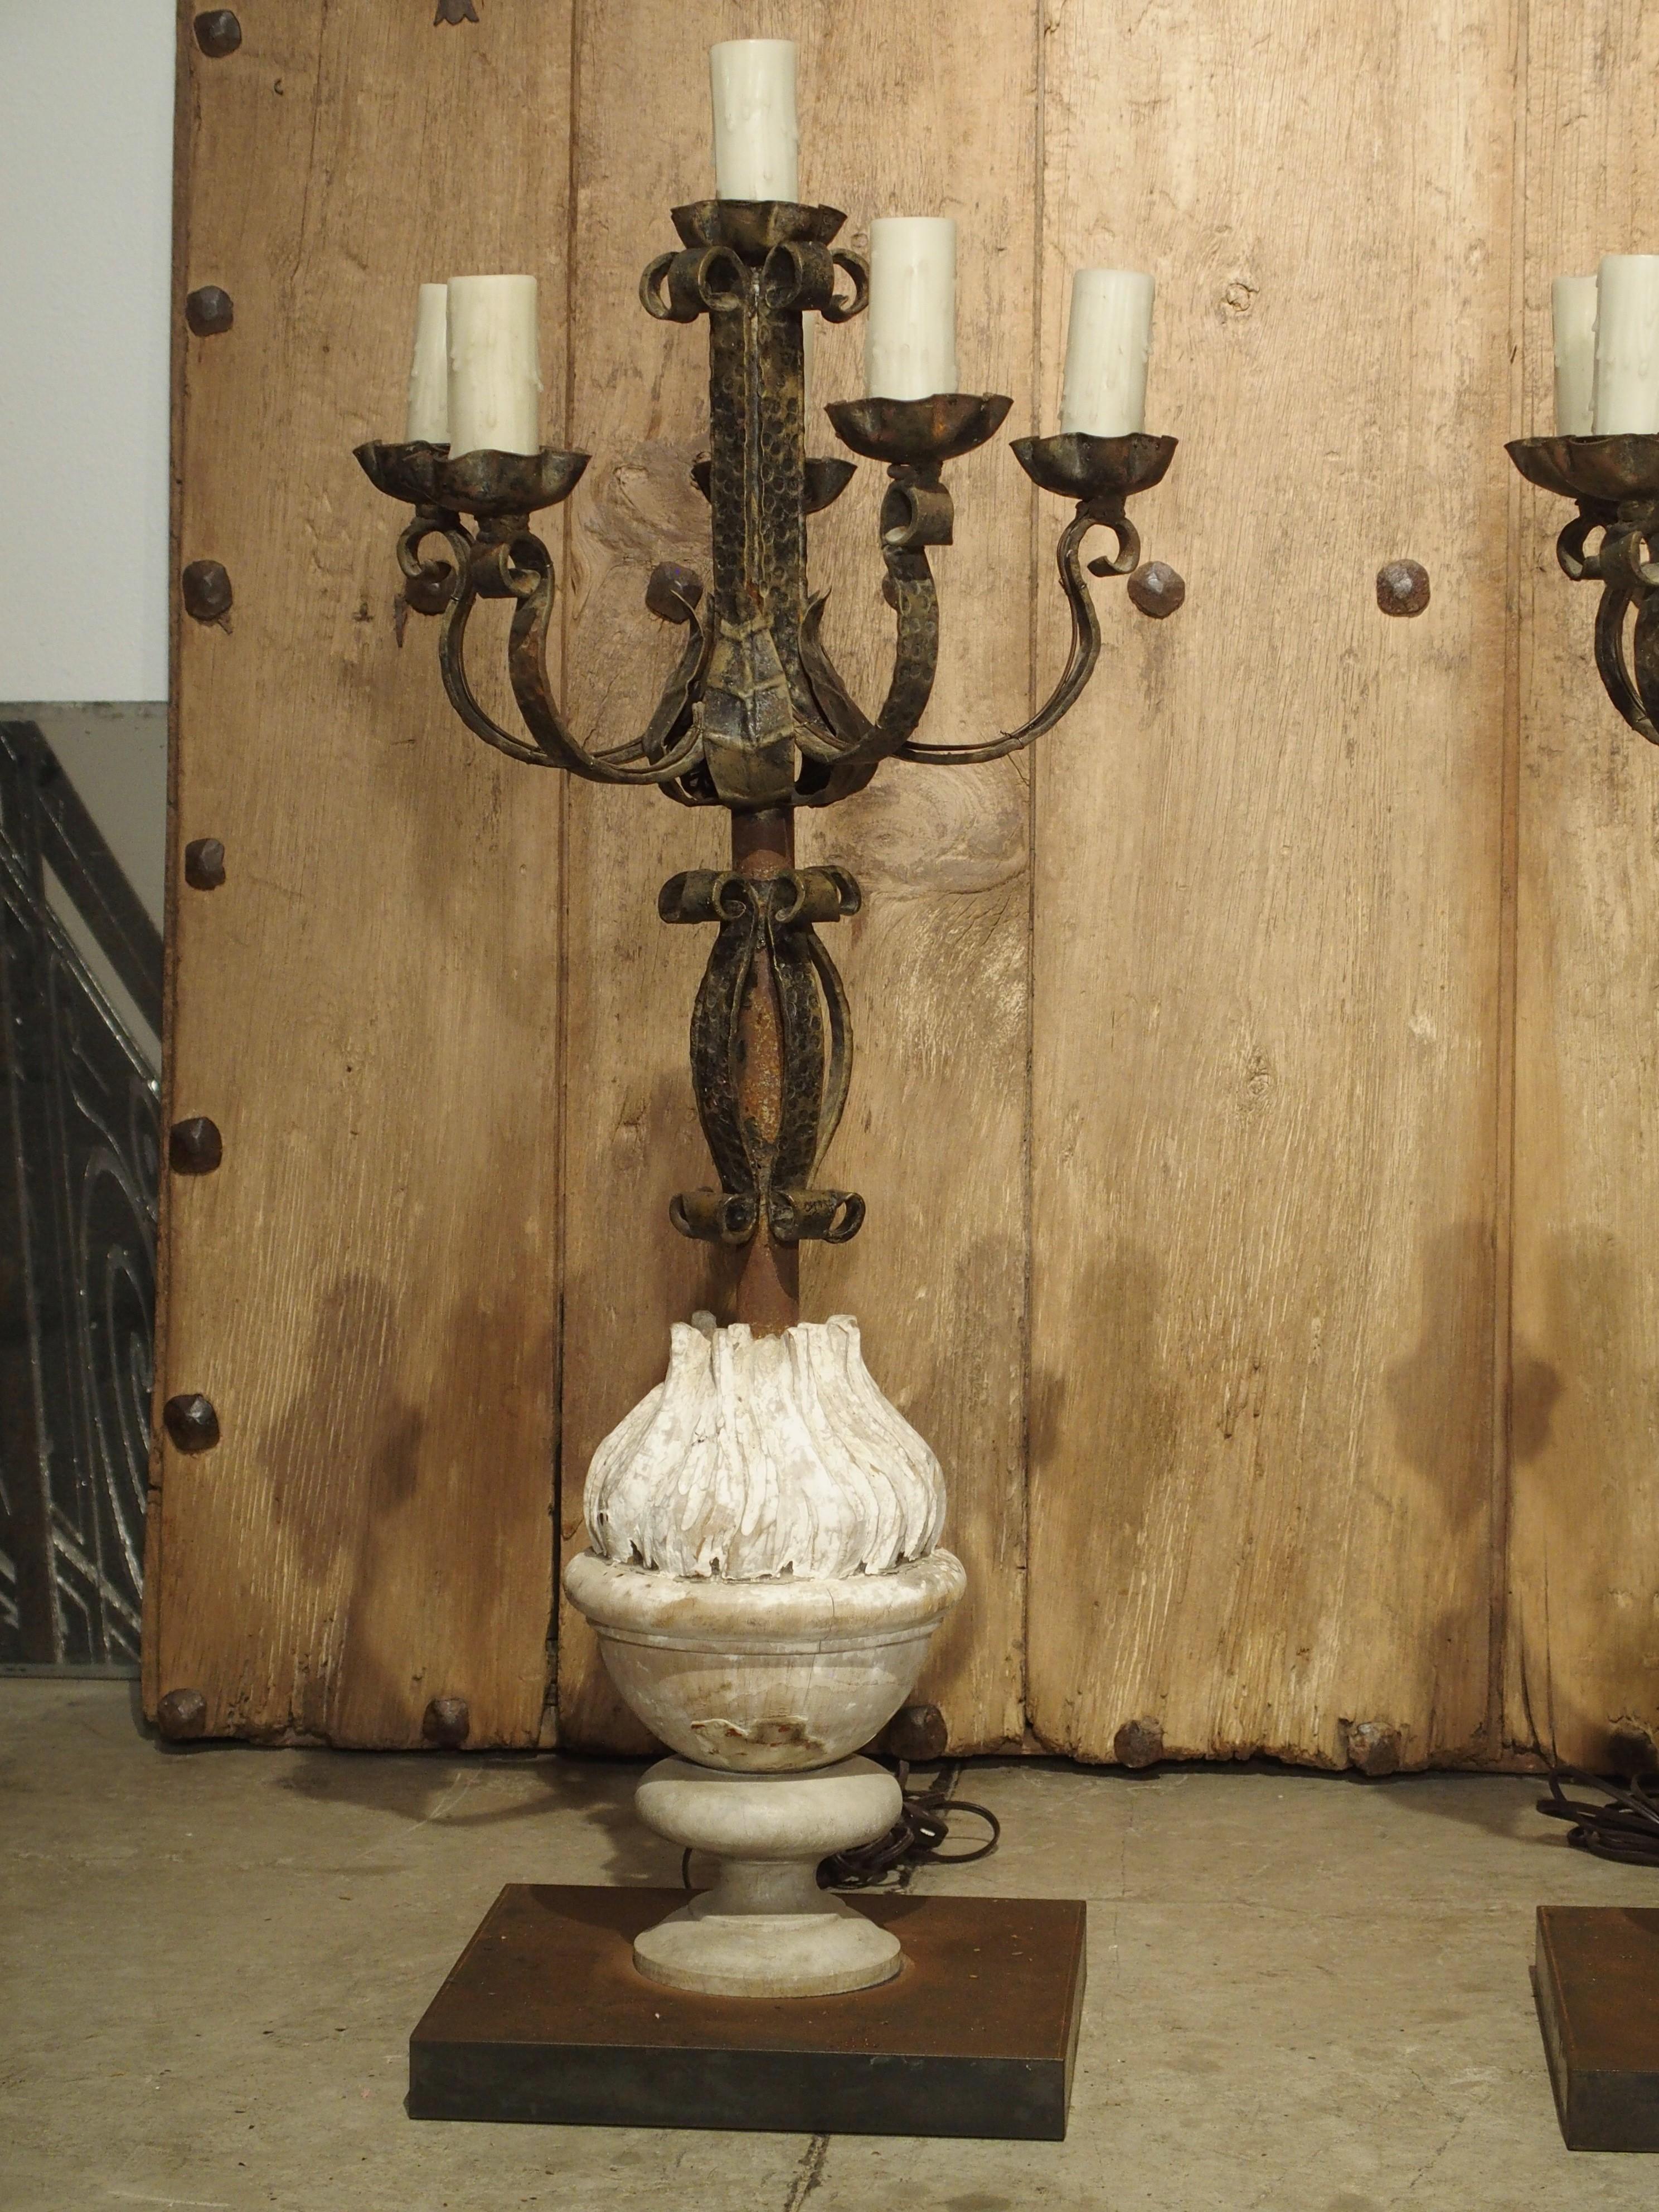 Made from hand wrought iron and repurposed antique elements, this pair of French candelabra lamps has a total of six sockets and a total height of 38 inches. The light of the central column rises above the surrounding lights atop the five curled